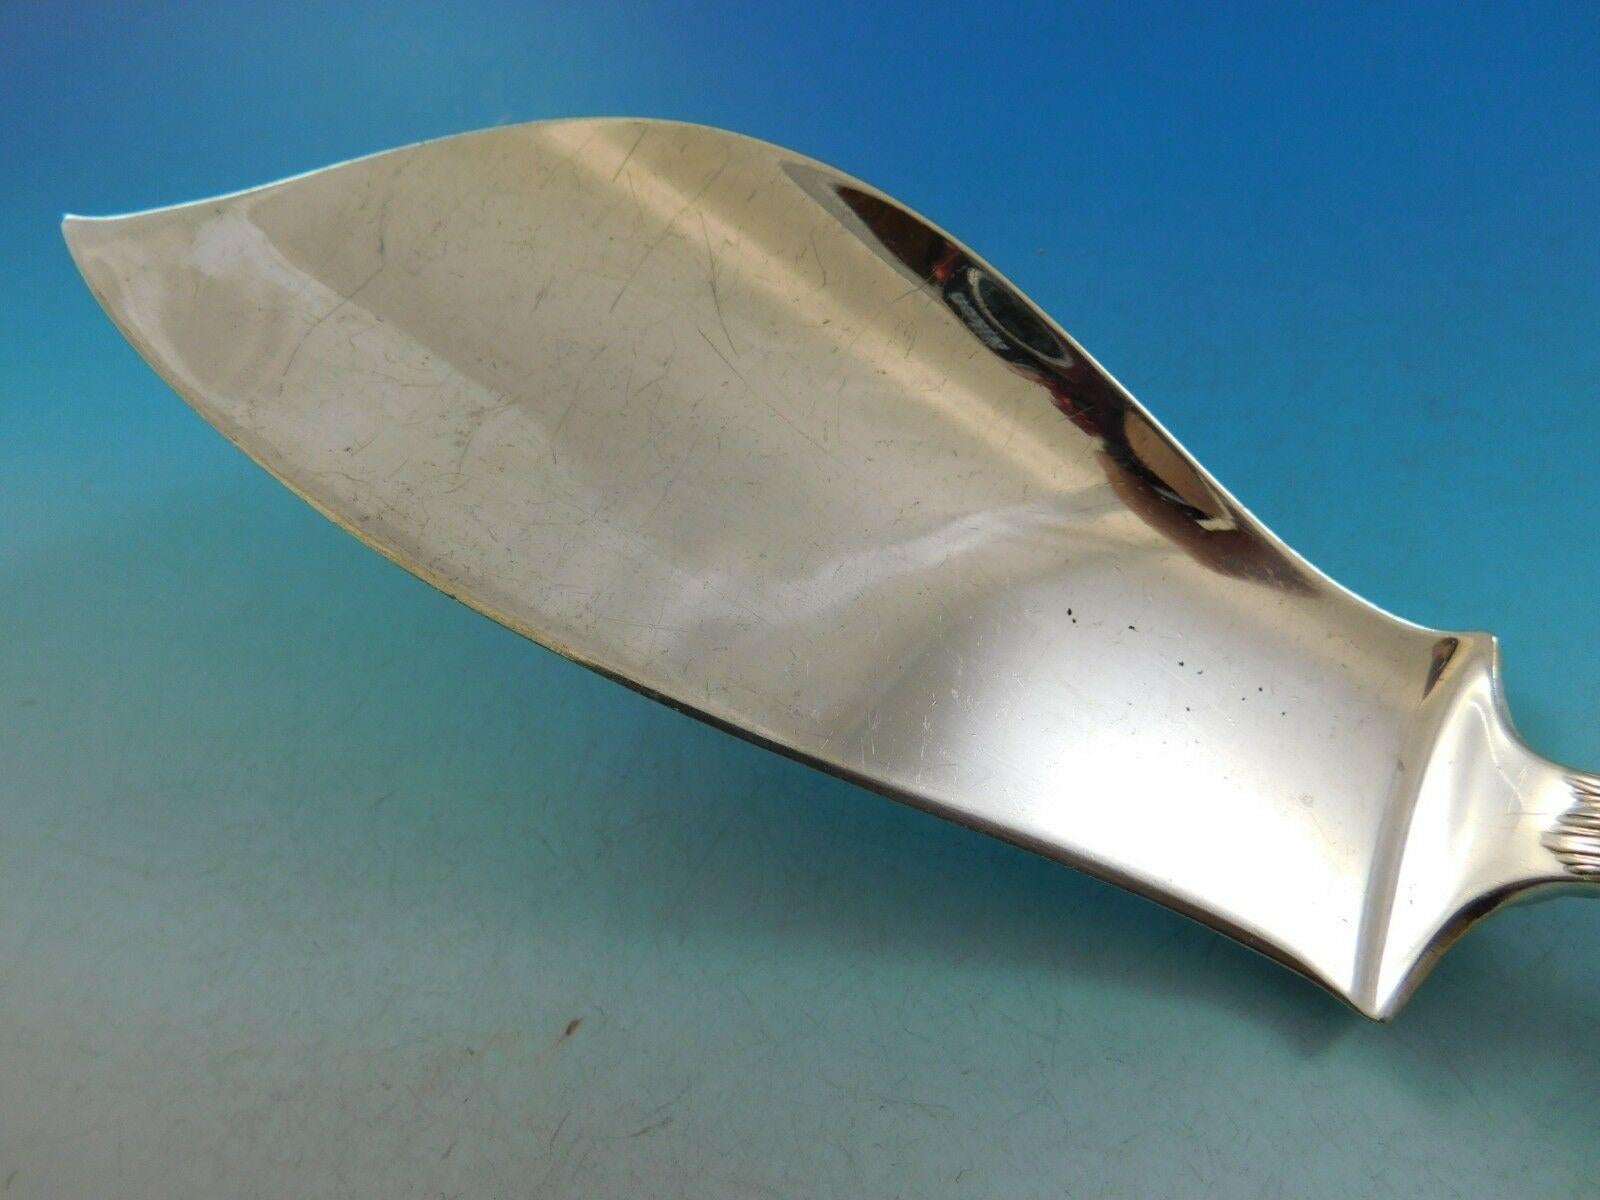 Dolphin by Tiffany & Co.

Masterfully crafted sterling silver fish server measuring 12 1/2